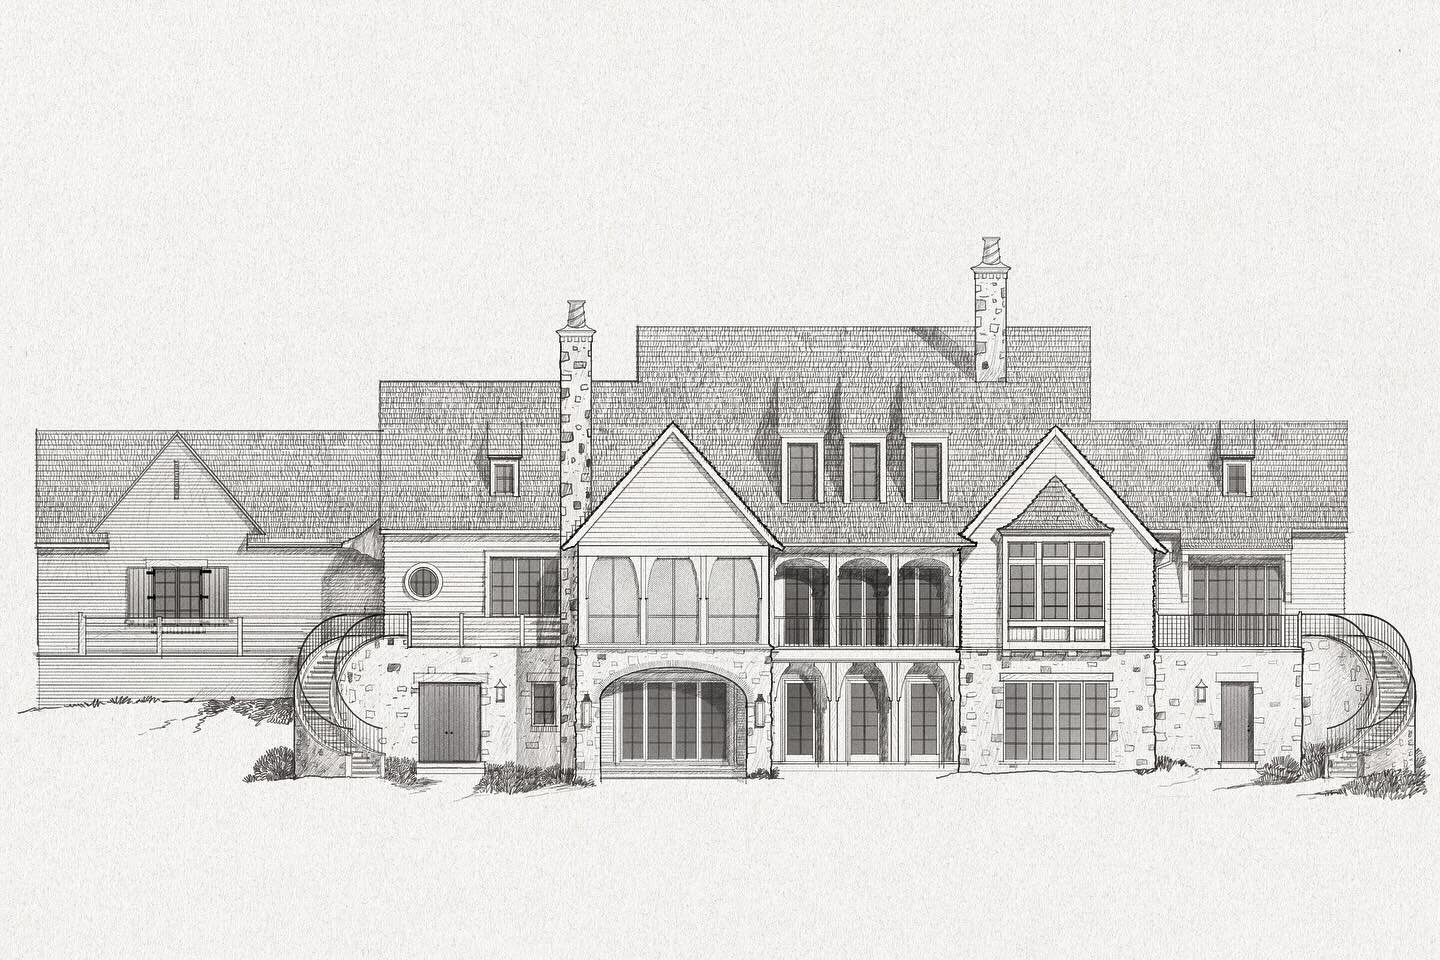 Lake-side elevation for a new project. 
&darr; 
&darr;
&darr;
#architect #TraditionalDesign #ArchitectDesigned #TraditionalHouse #HomeInspiration #Homeinspo #HouseDesign #TraditionalArchitecture #TraditionalHome #TraditionalHomeDesign #architectdesig